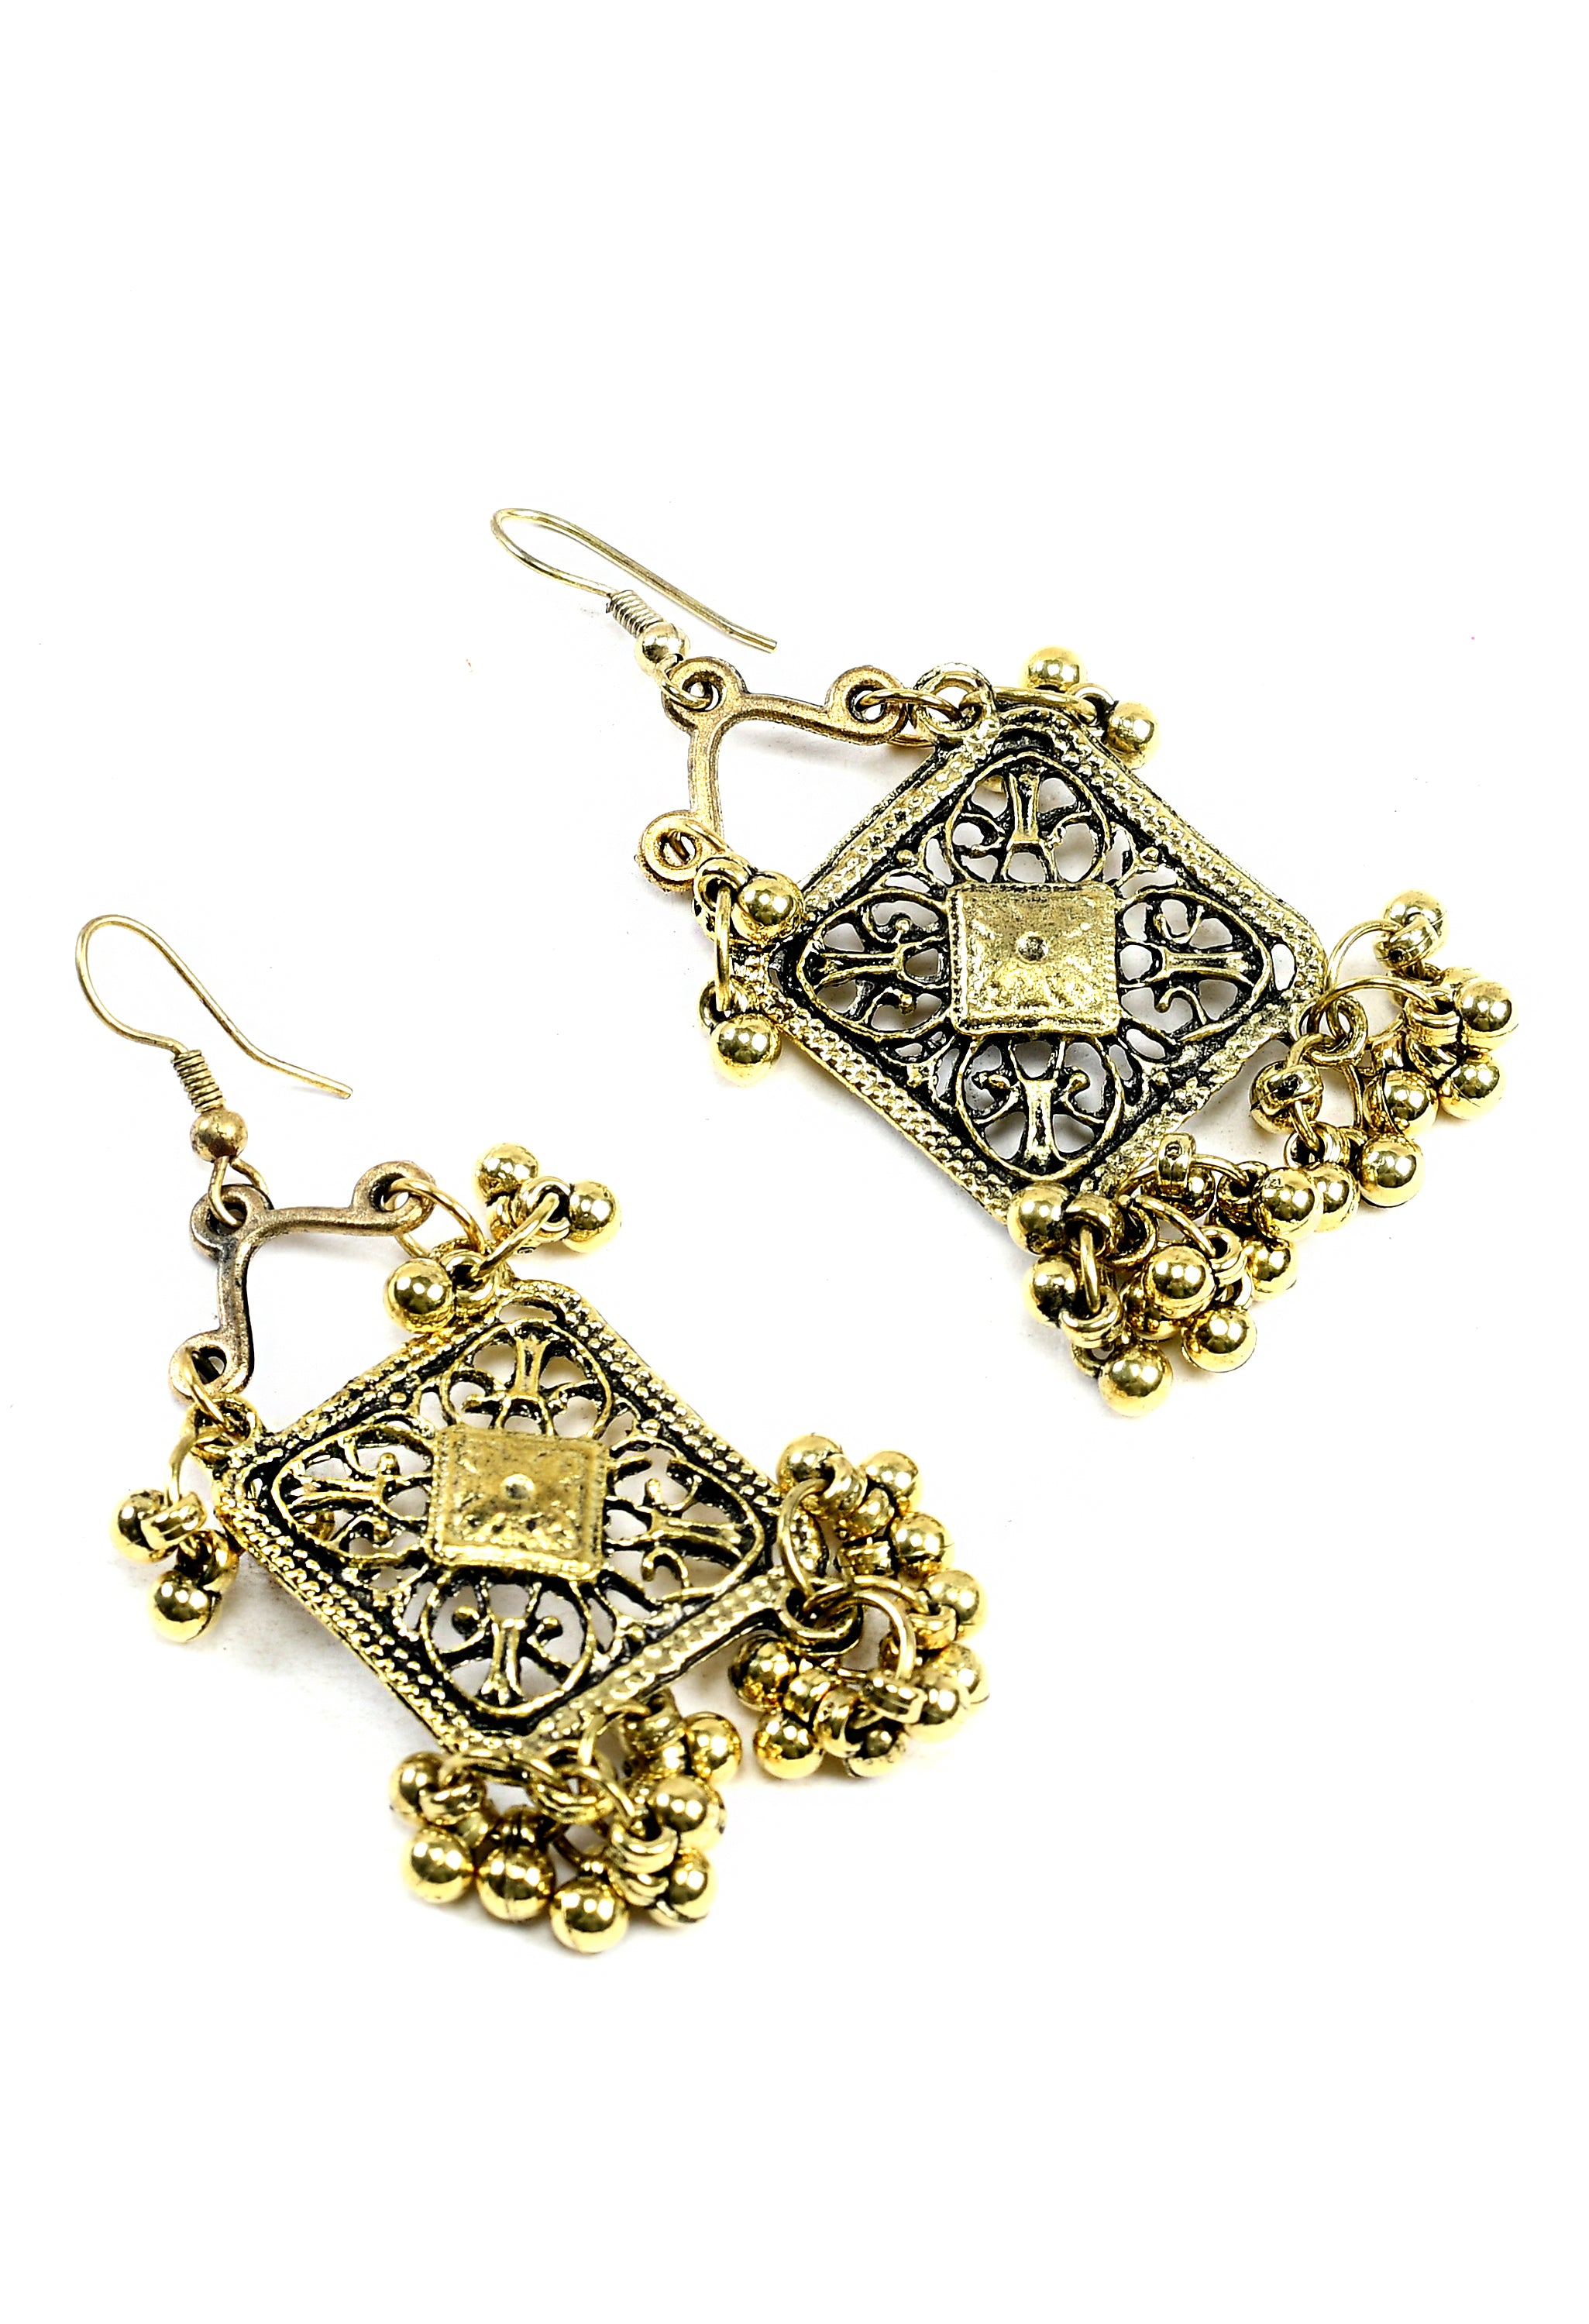 Women's Golden Colour Oxidised Necklaceand Earrings With Ghunghru Design - Tehzeeb